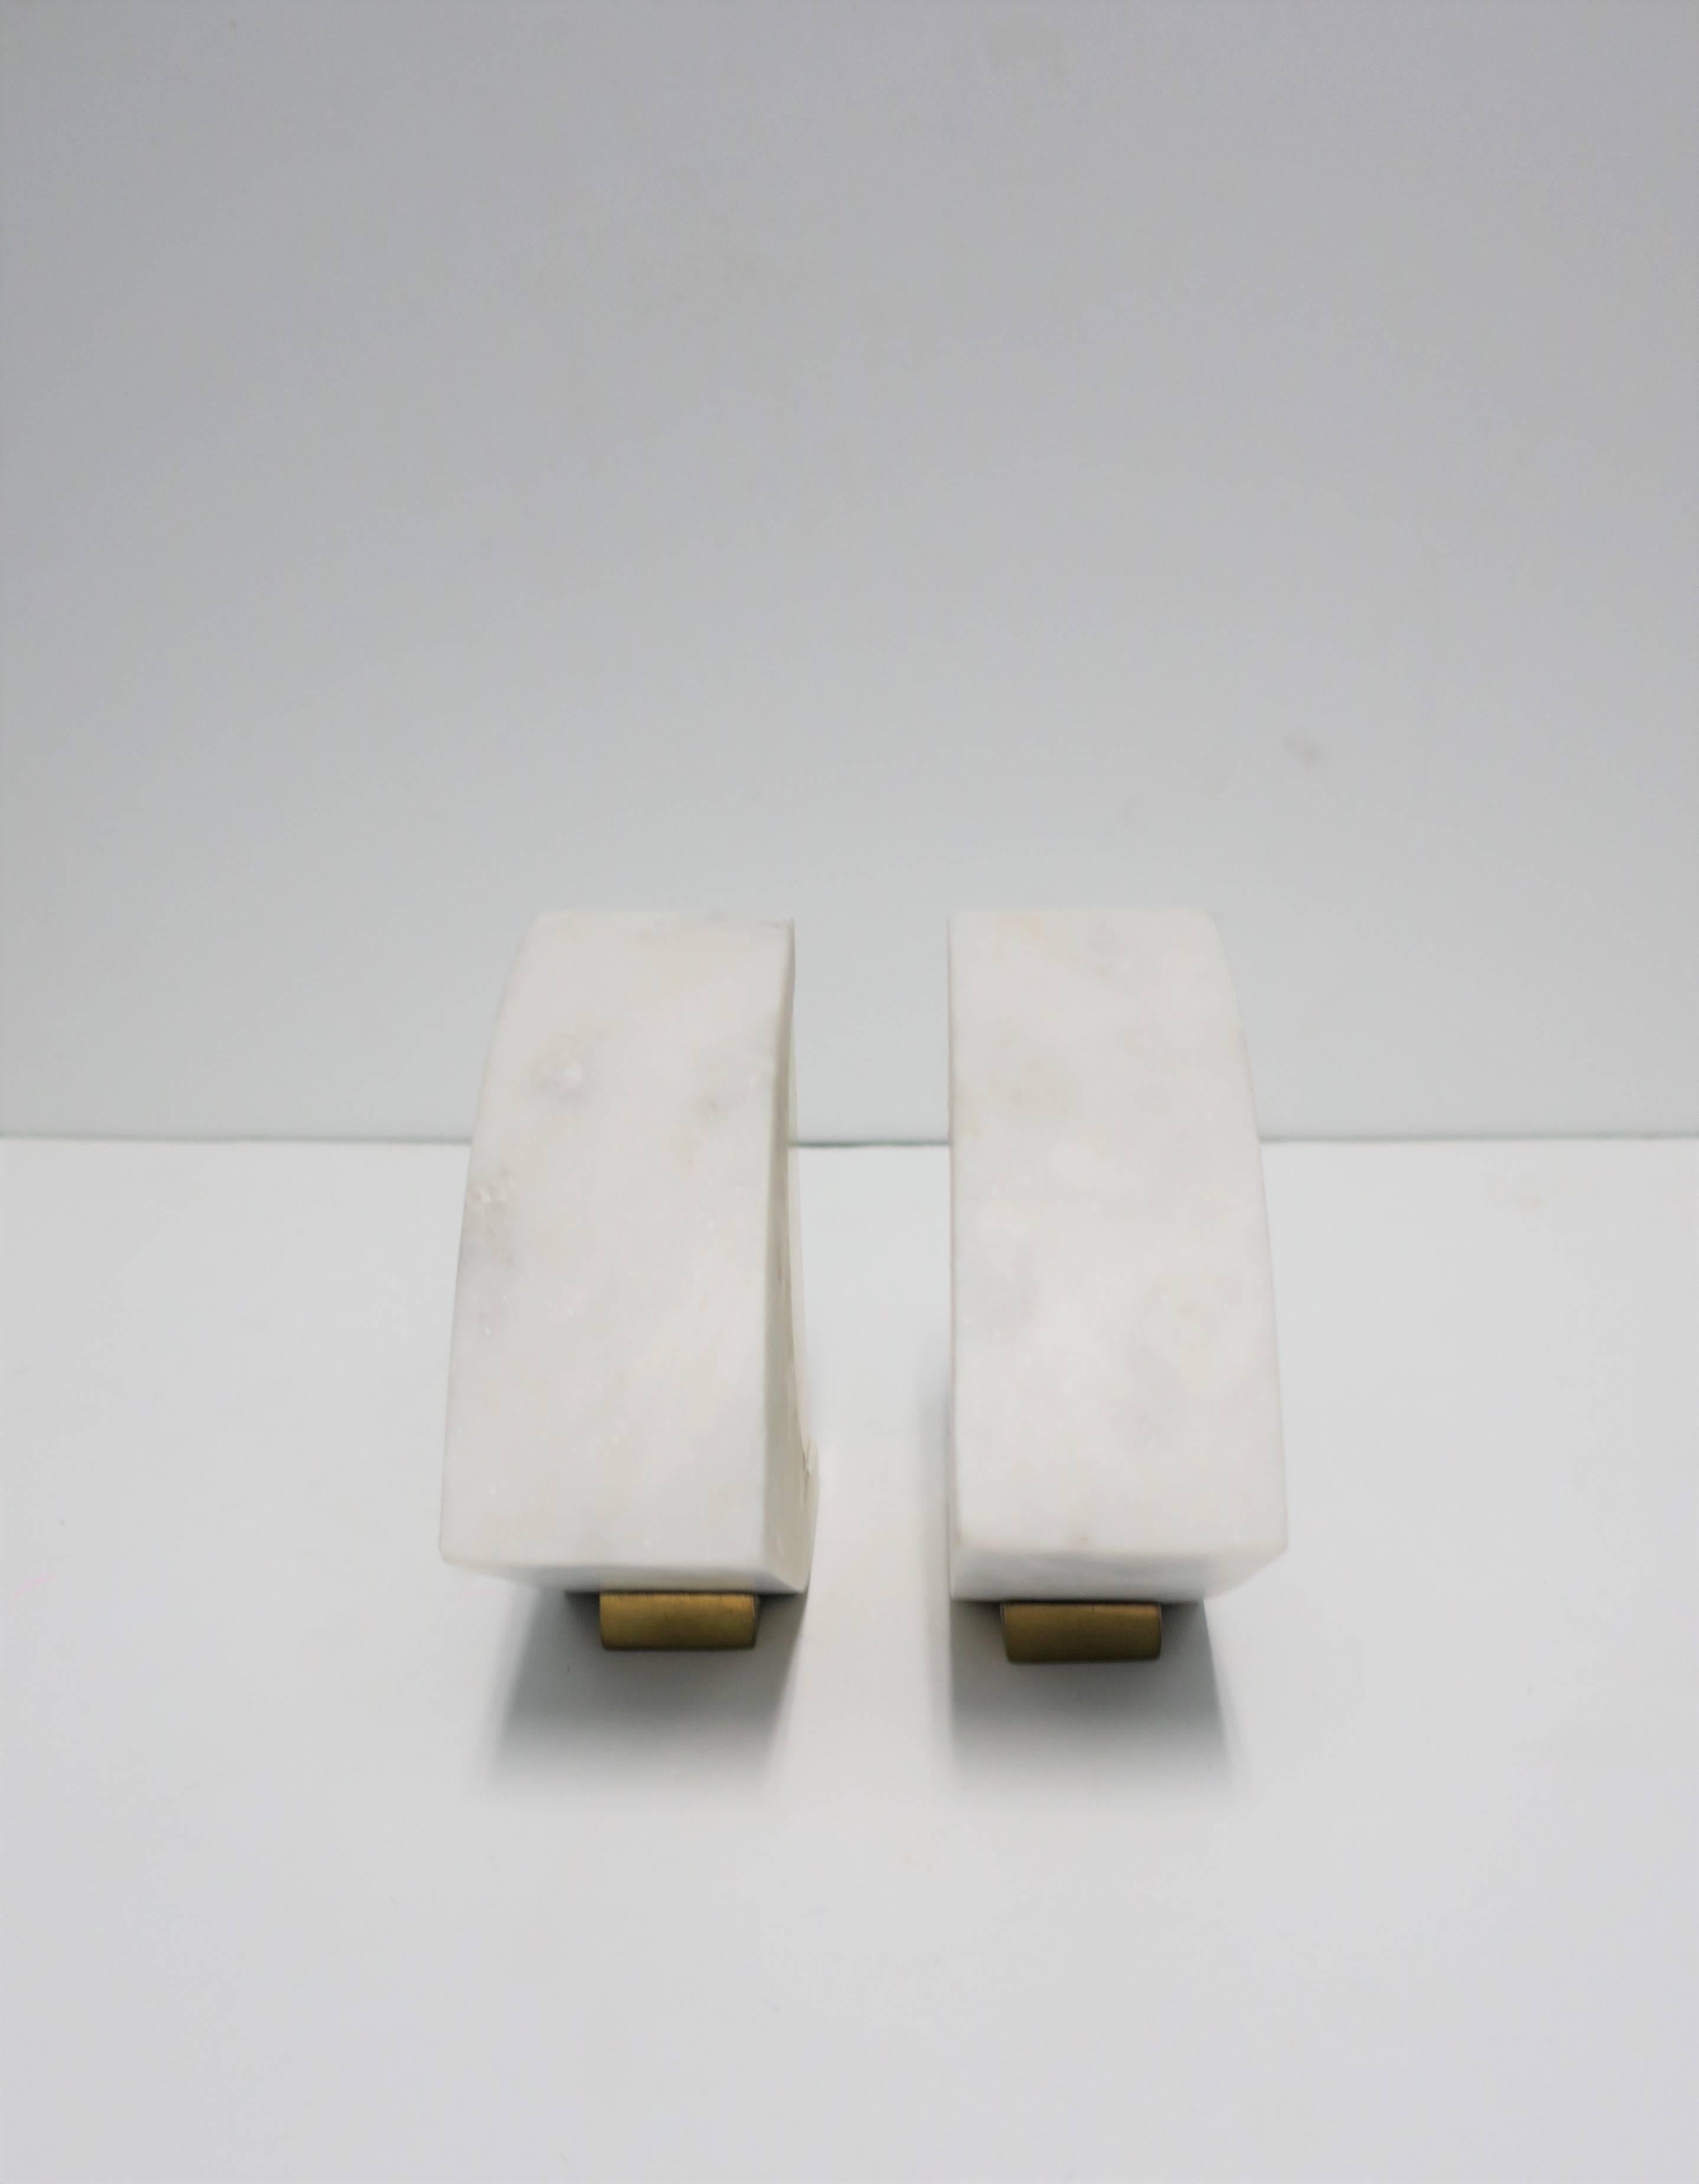 White and Gold Marble Bookends or Decorative Object Sculpture 2